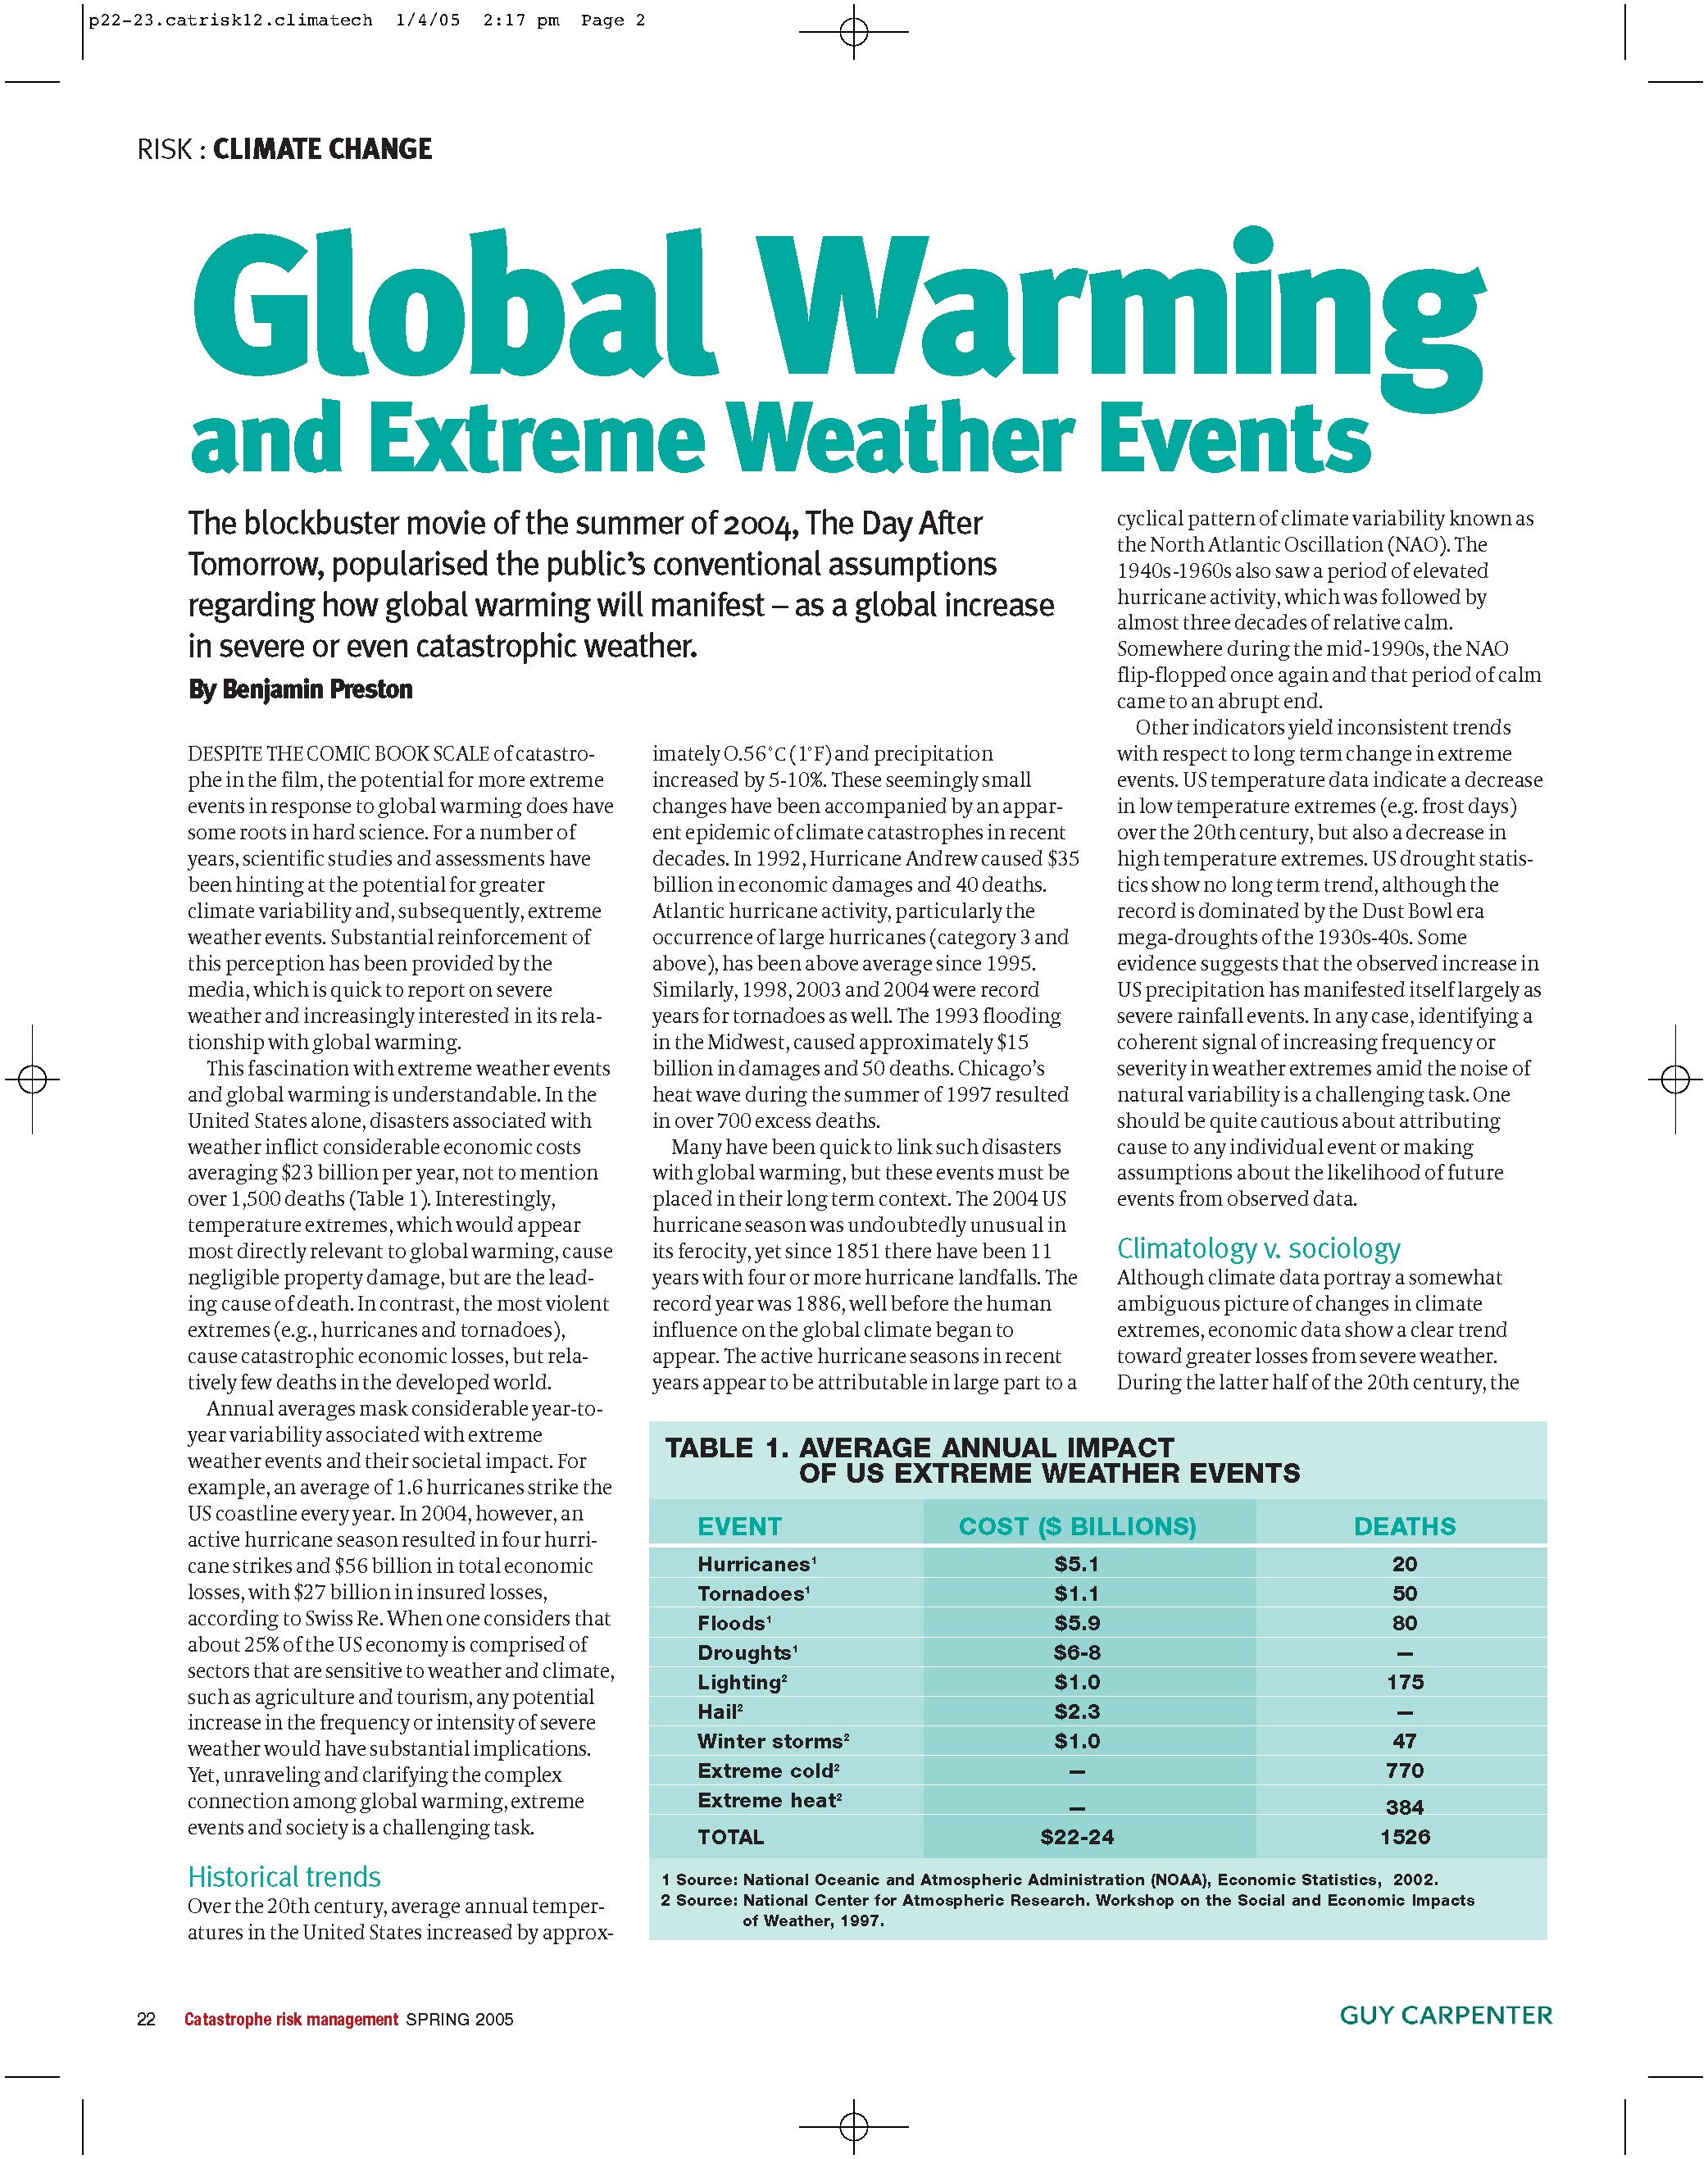 essay about global warming pdf